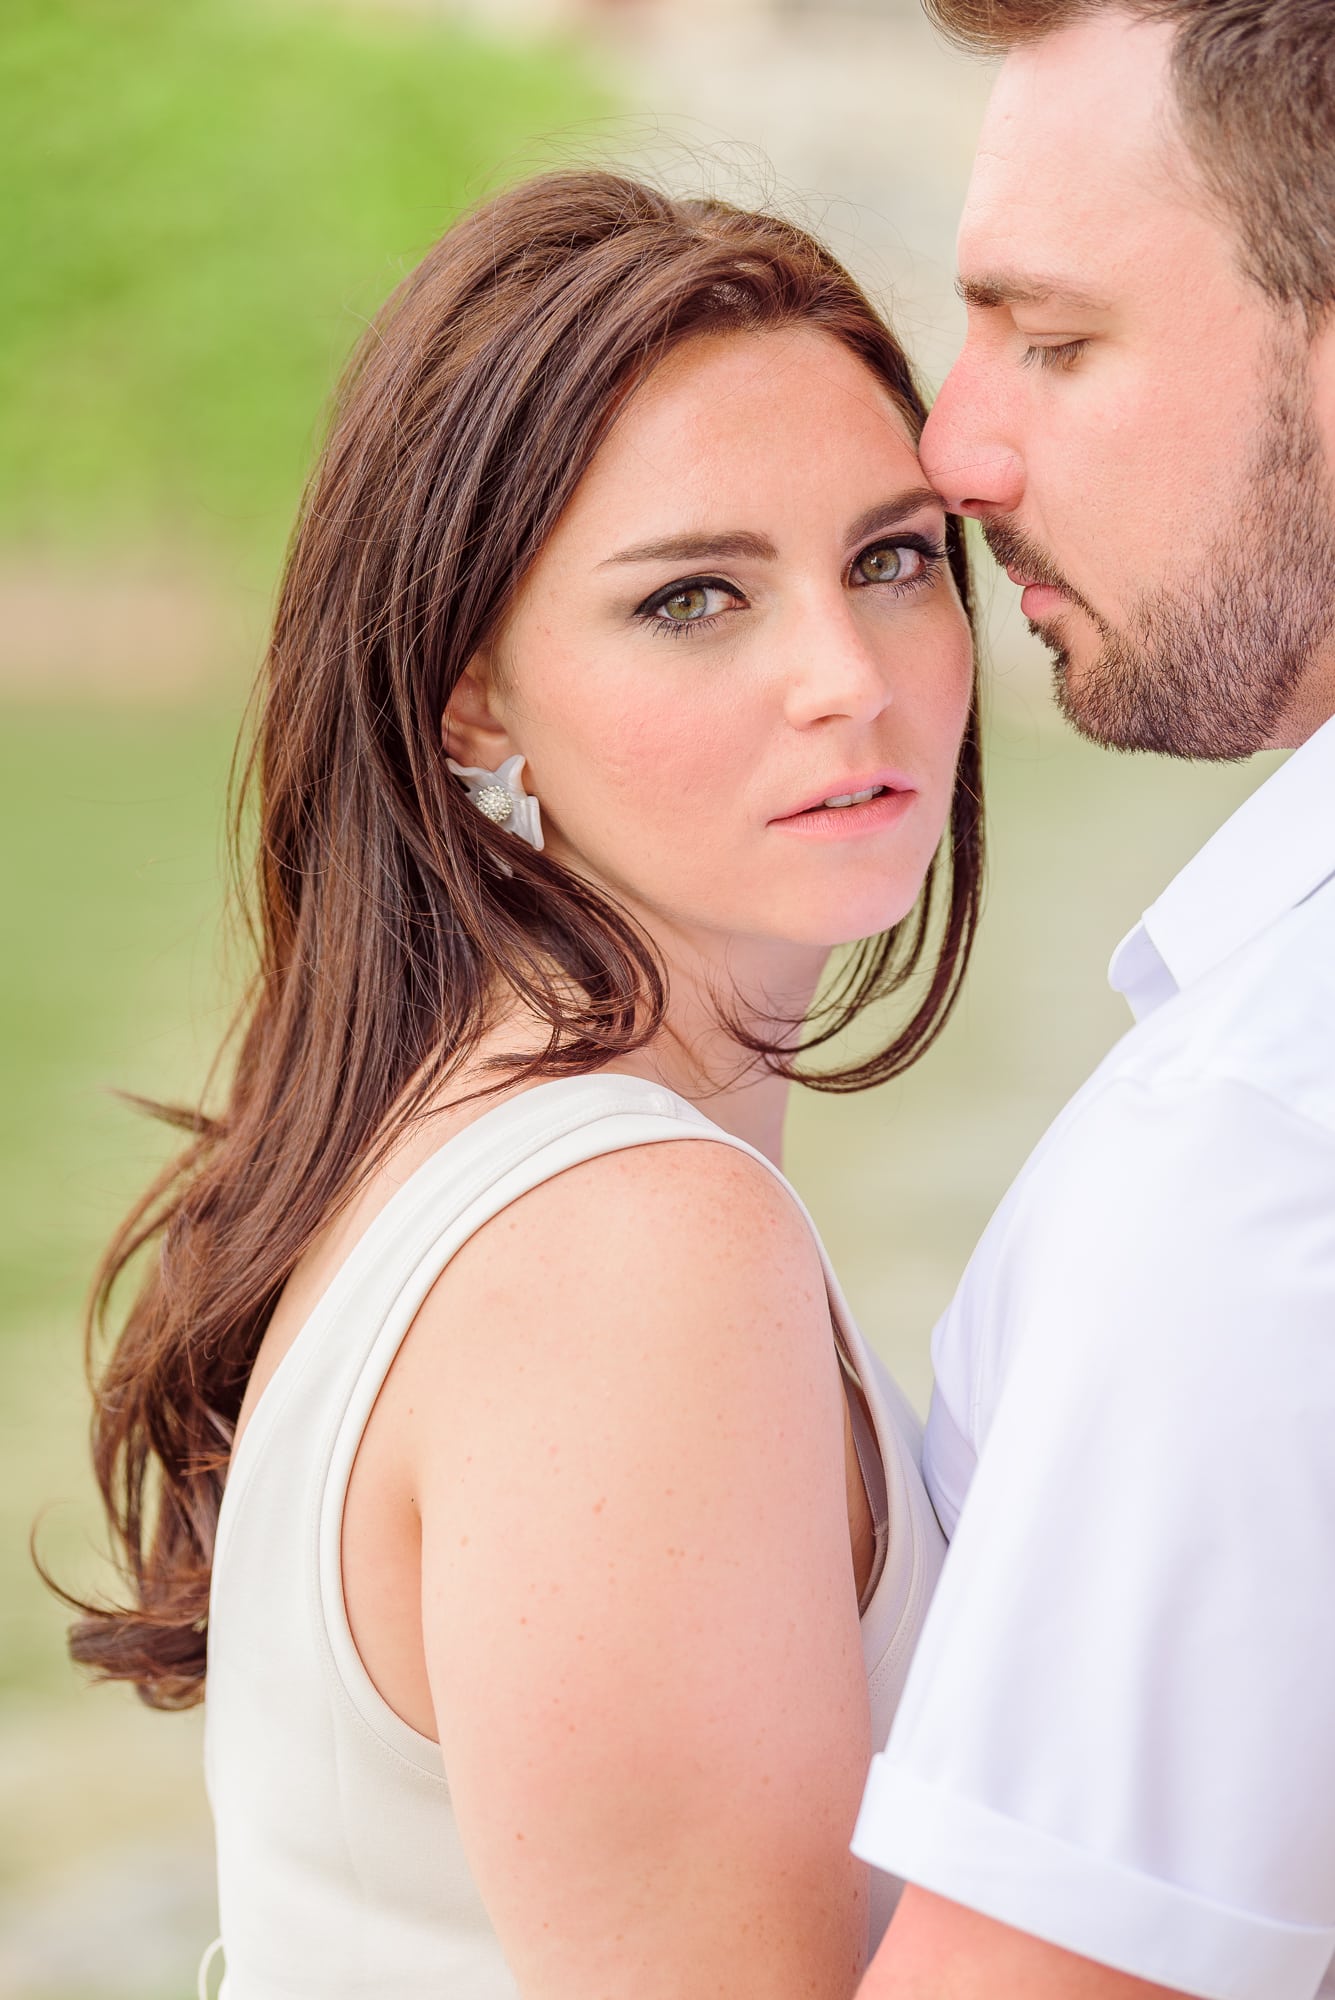 Chrissy looks directly into the camera during her European style engagement session.